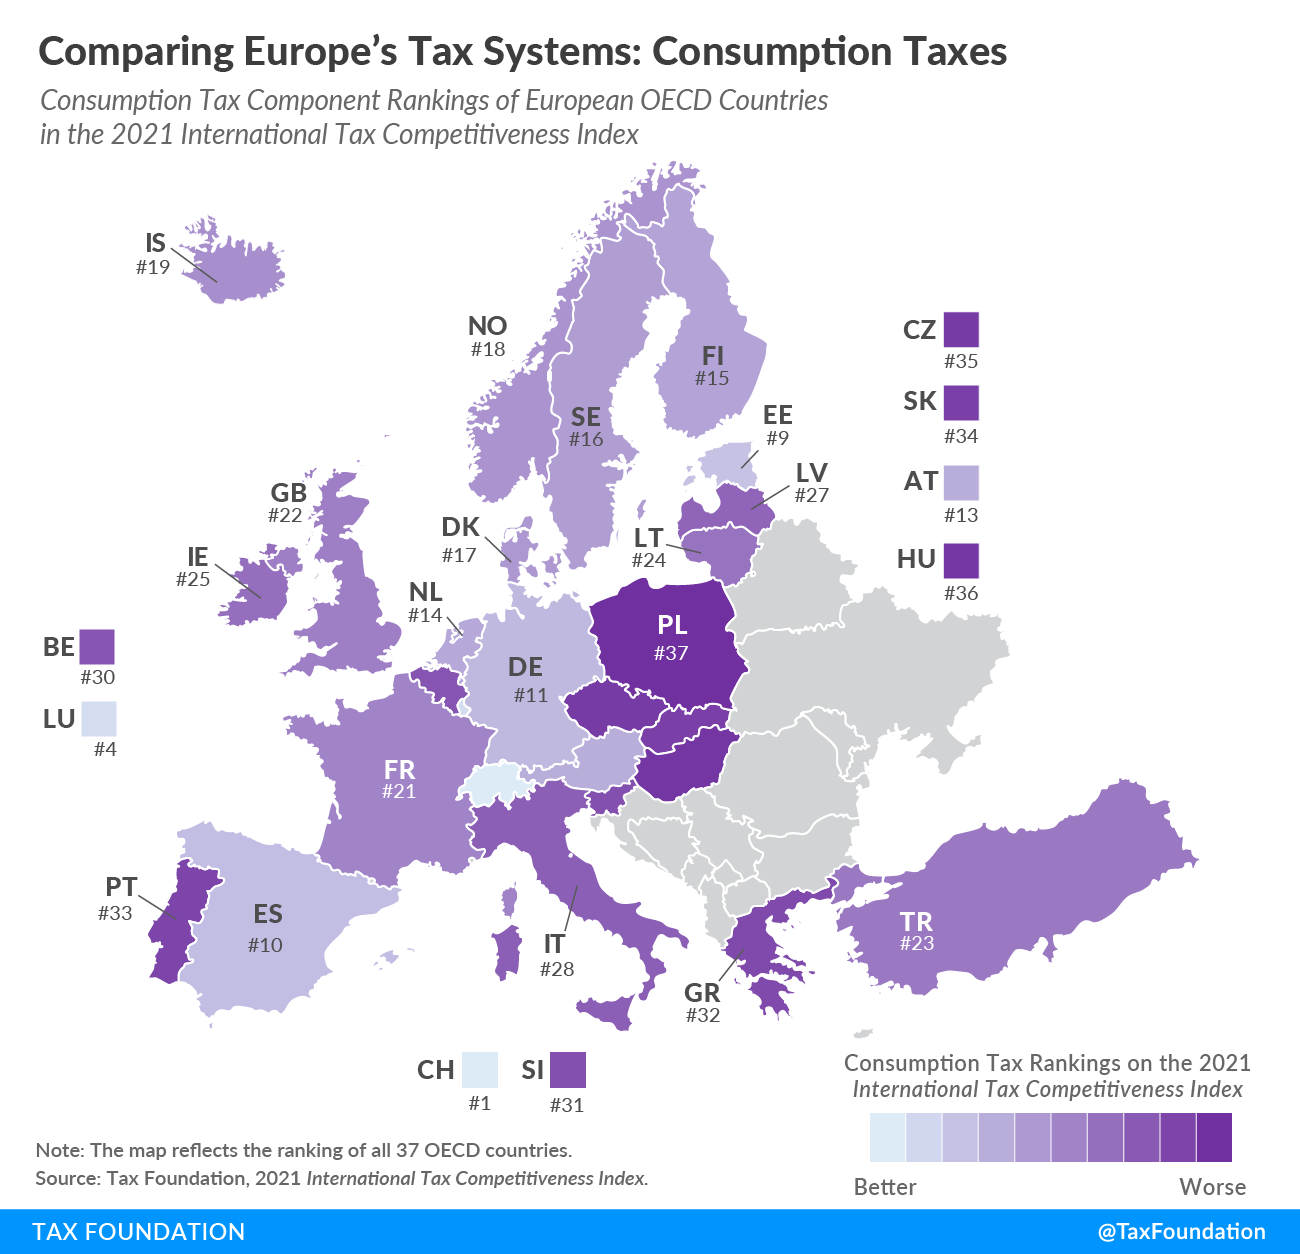 2021-Consumption-Tax-Systems-in-Europe-Comparing-Consumption-Tax-Systems-in-Europe-2021-worst-Consumption-tax-systems-in-Europe-Consumption-taxes-in-Europe.png